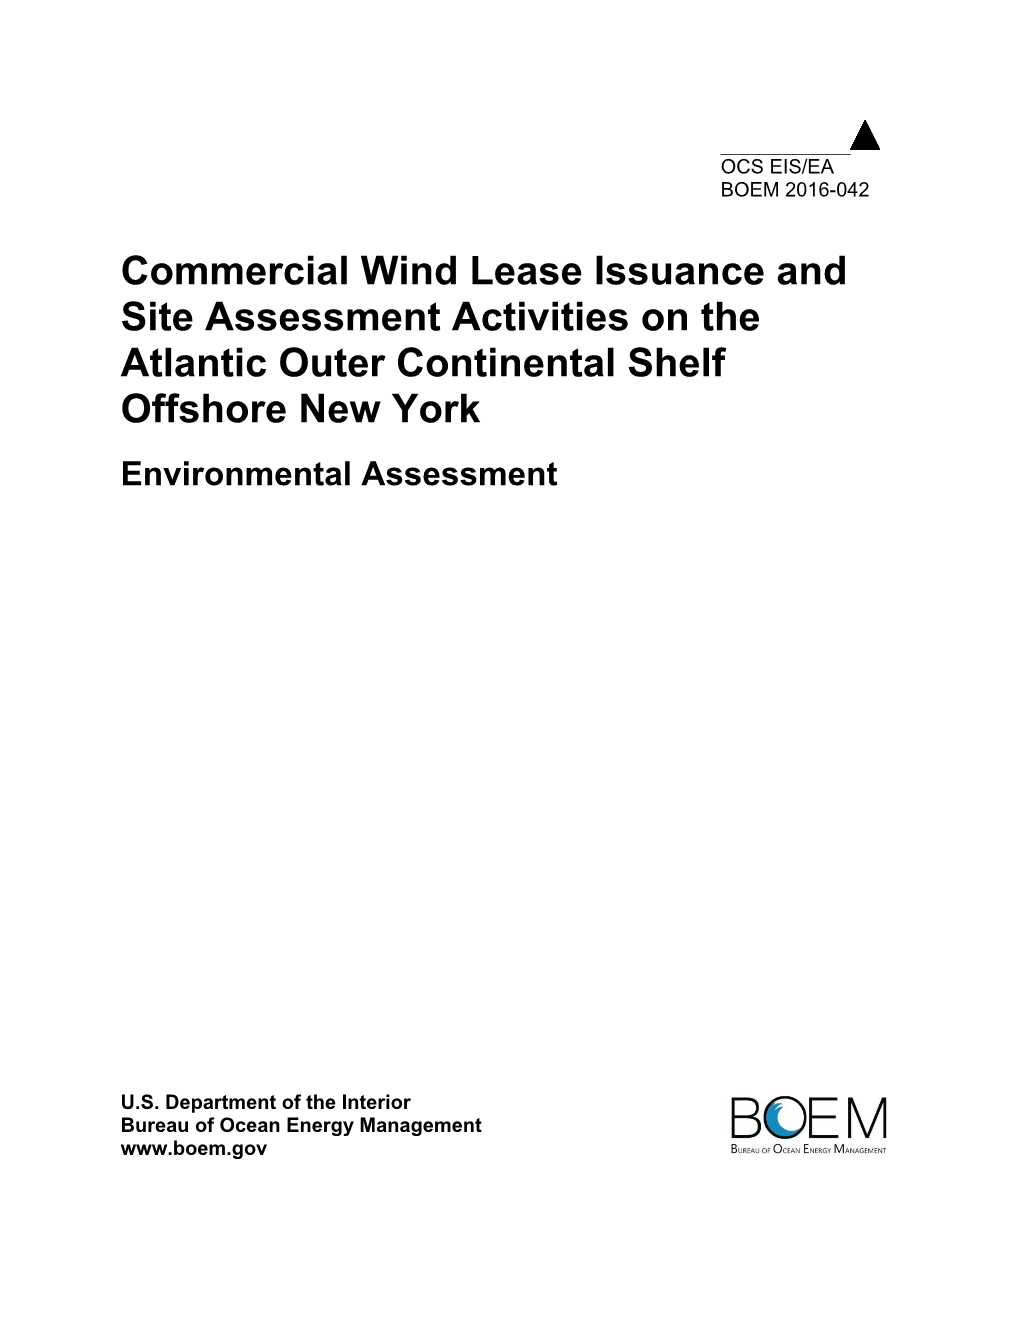 Commercial Wind Lease Issuance and Site Assessment Activities on the Atlantic Outer Continental Shelf Offshore New York